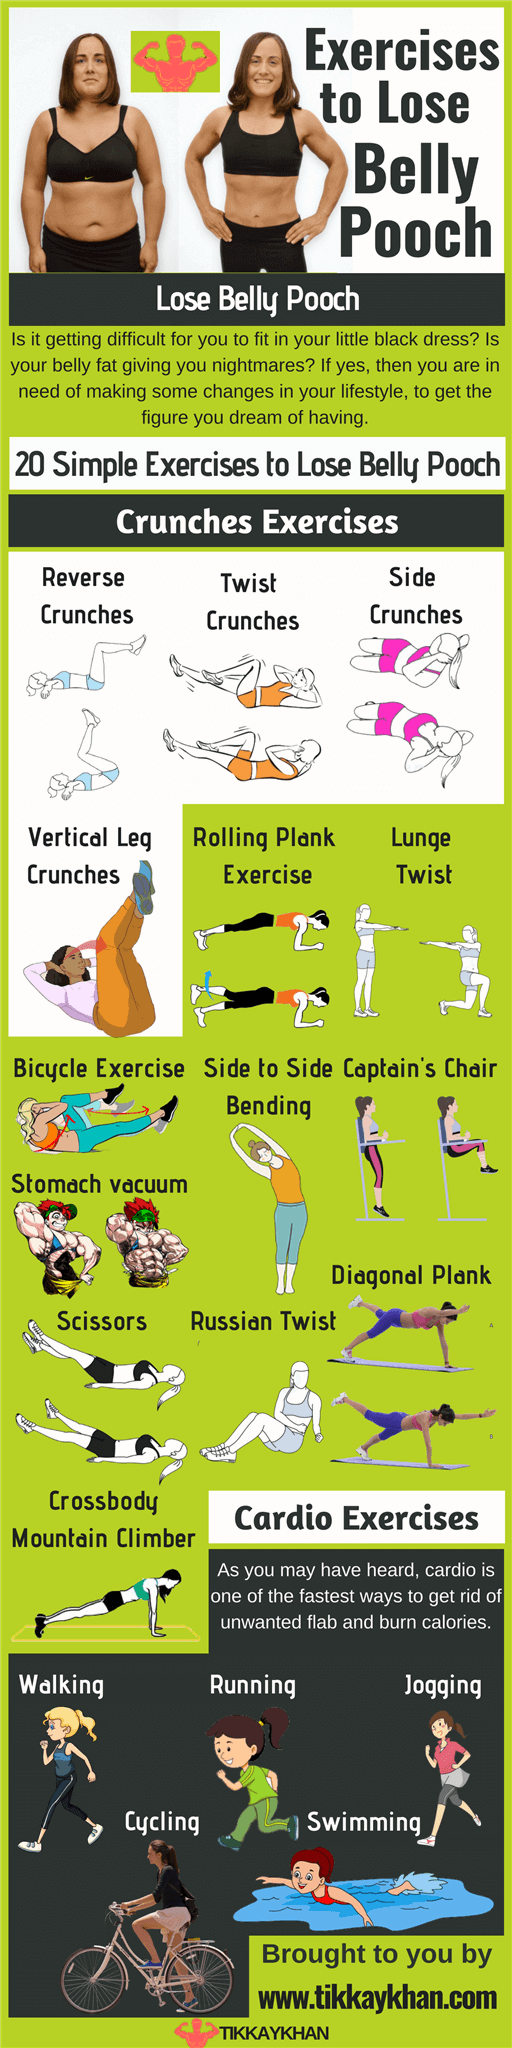 20 Simple Exercises to Lose Belly Pooch Infographic